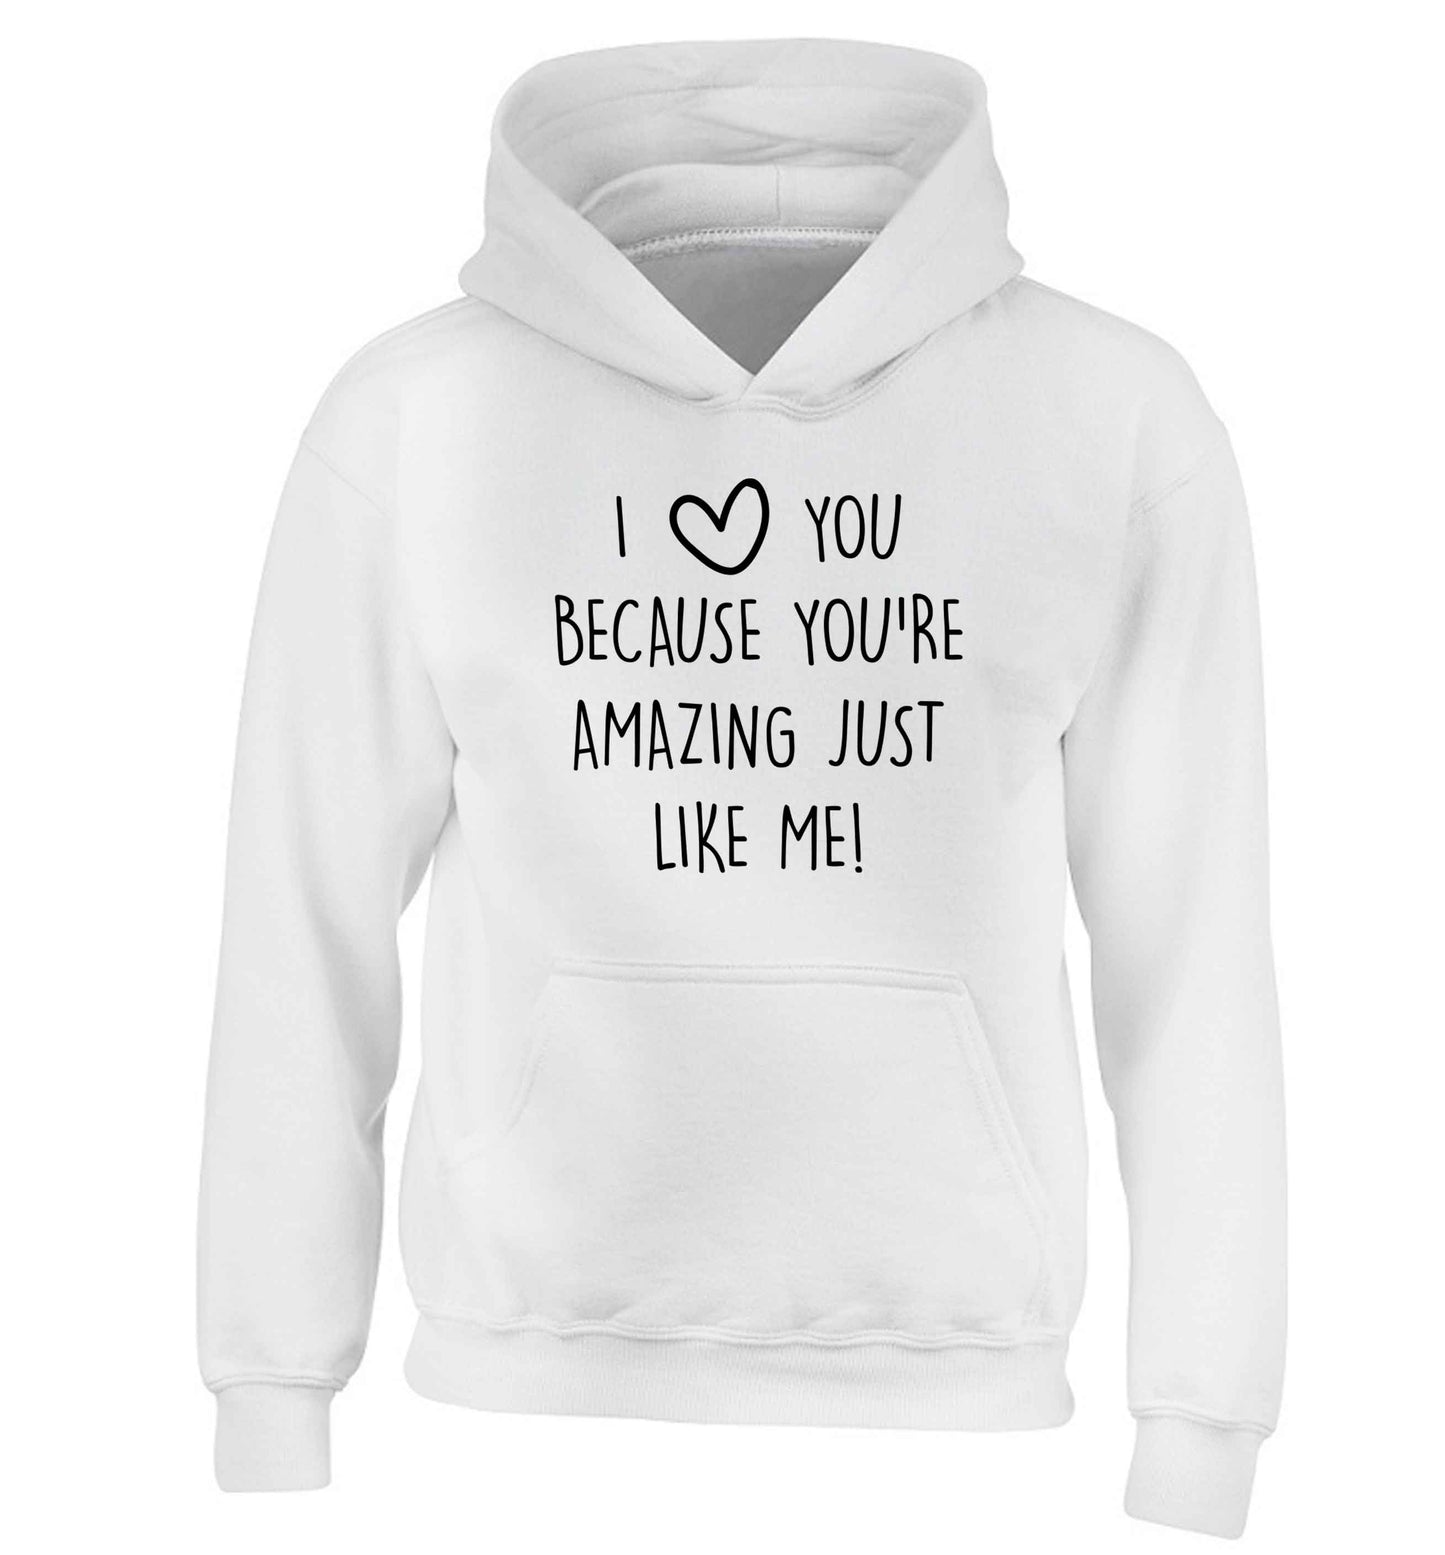 I love you because you're amazing just like me children's white hoodie 12-13 Years